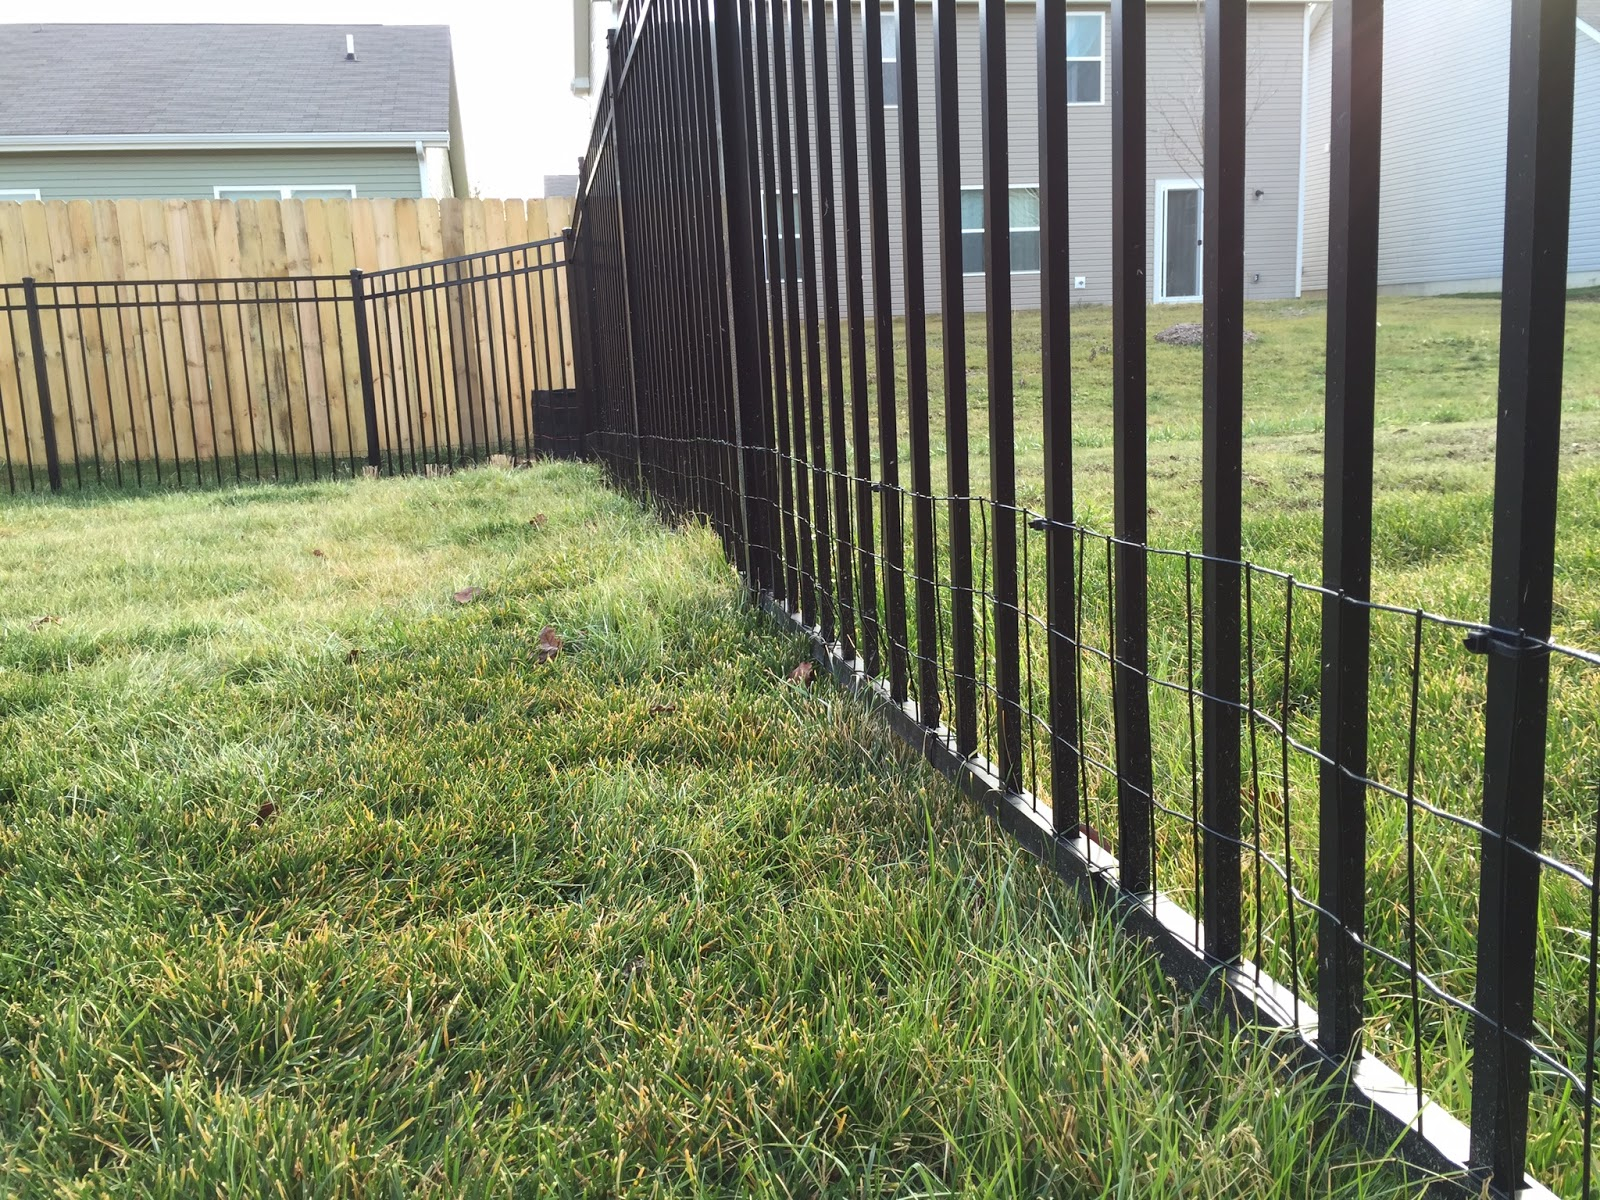 Diy Keep Small Dog In Yard With Welded Wire Aluminum Fence Garden regarding dimensions 1600 X 1200